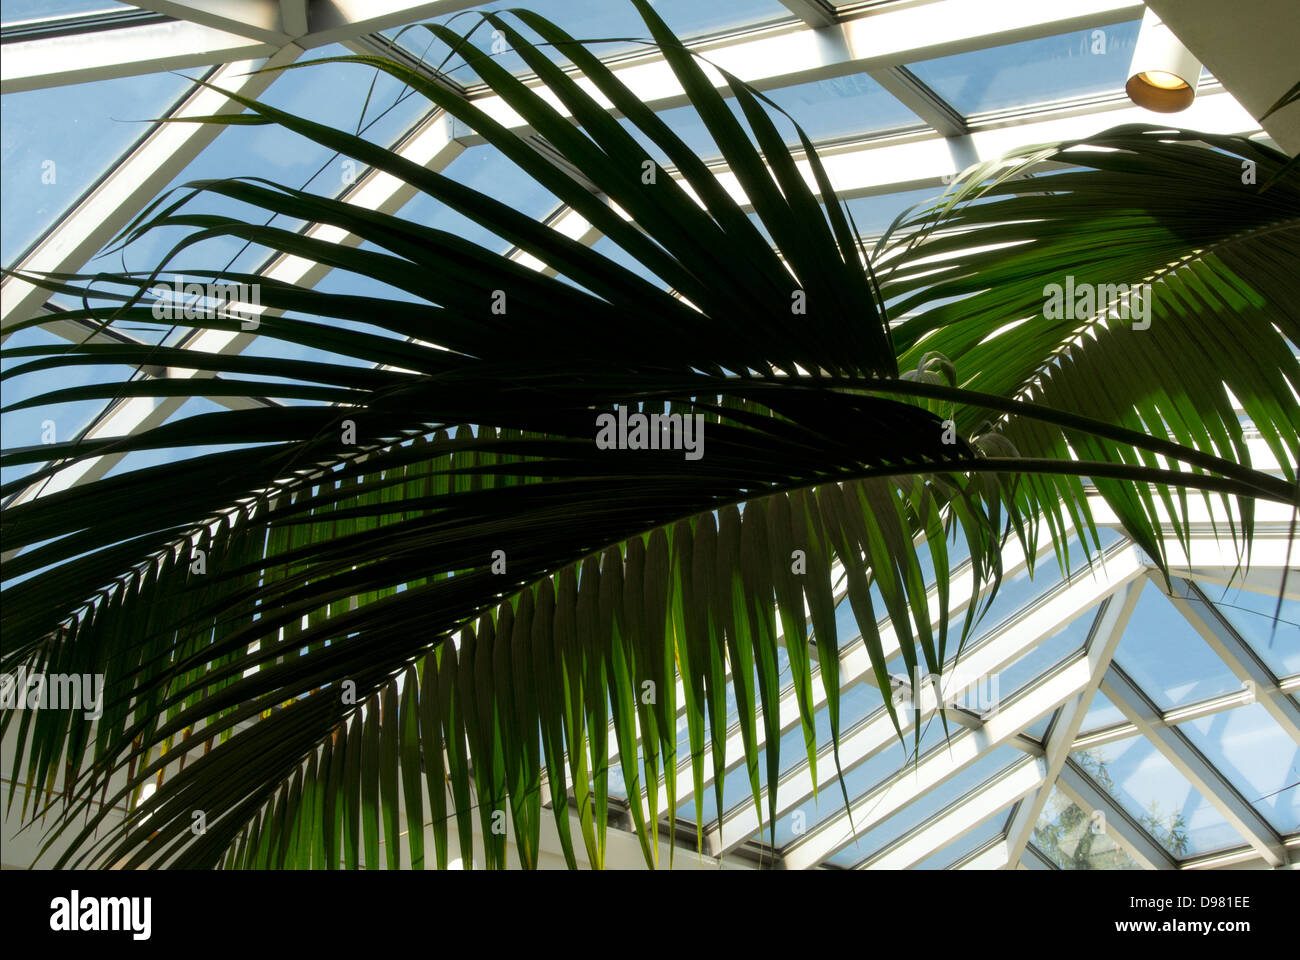 Glass ceiling in shopping mall. Stock Photo